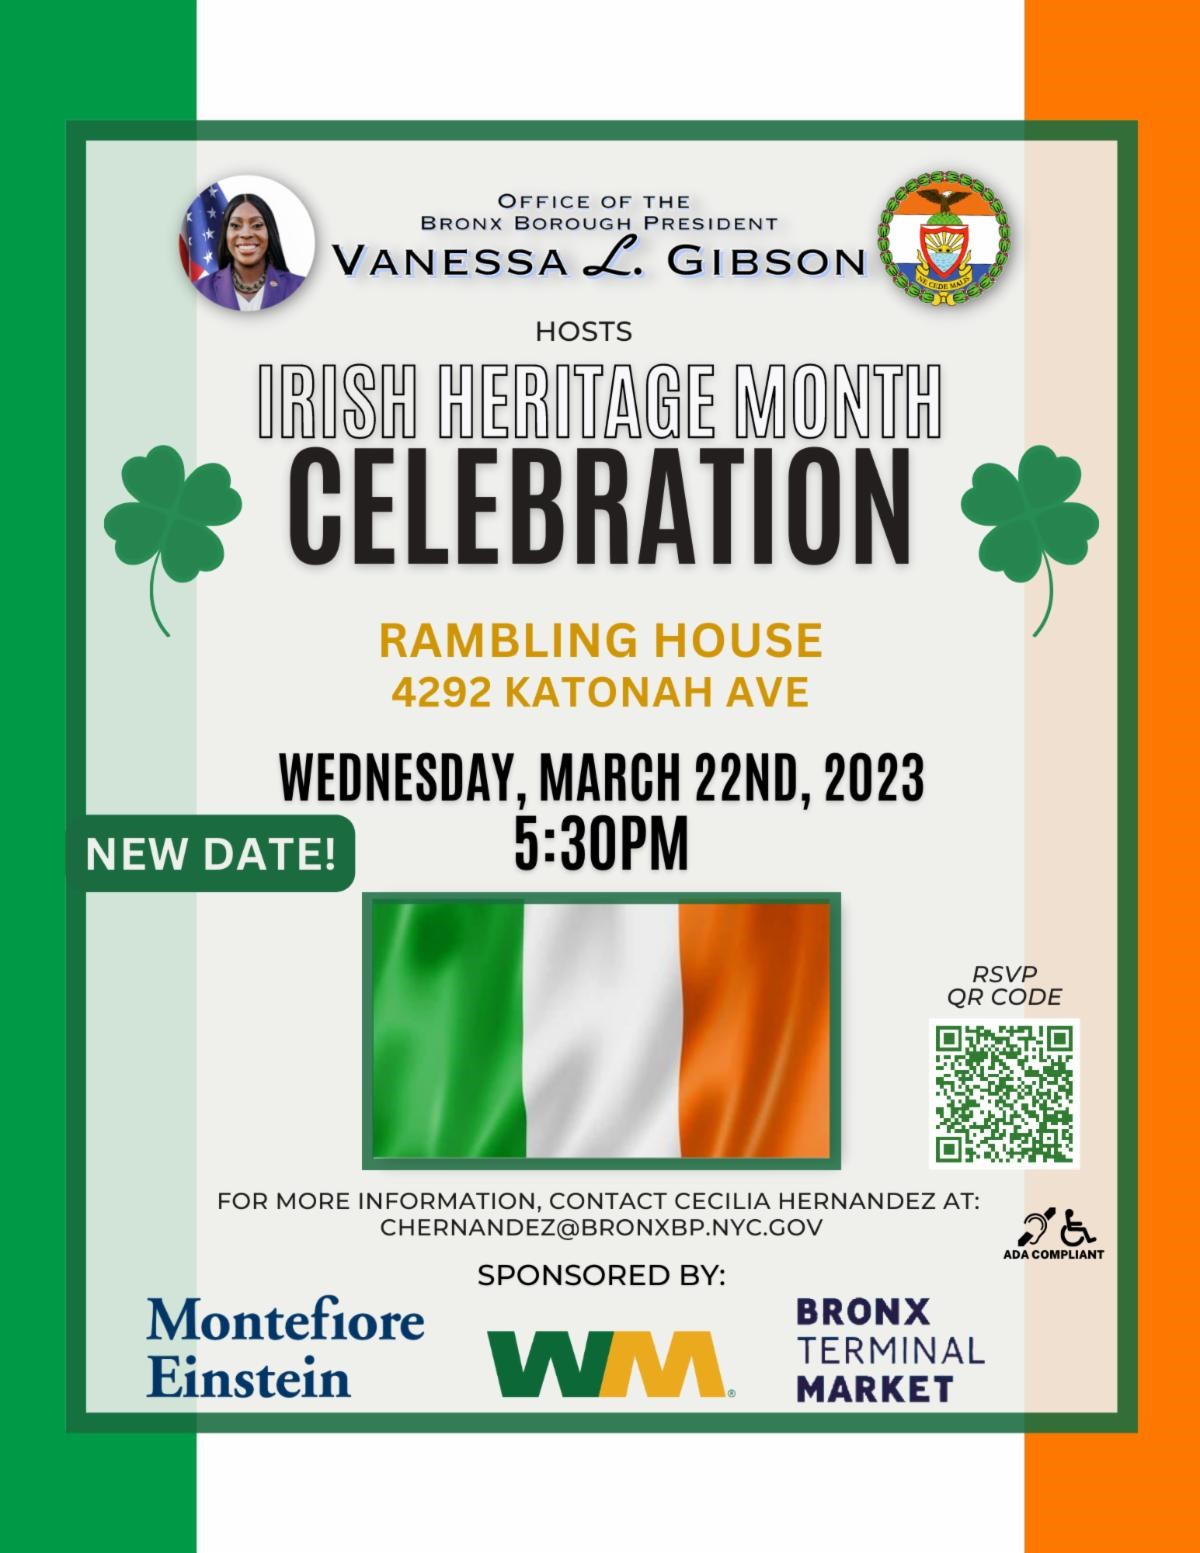 Flyer for Irish Heritage Celebration at 5:30 PM on 3/22/23 - contact chernandez@bronxbp.nyc.gov for more info